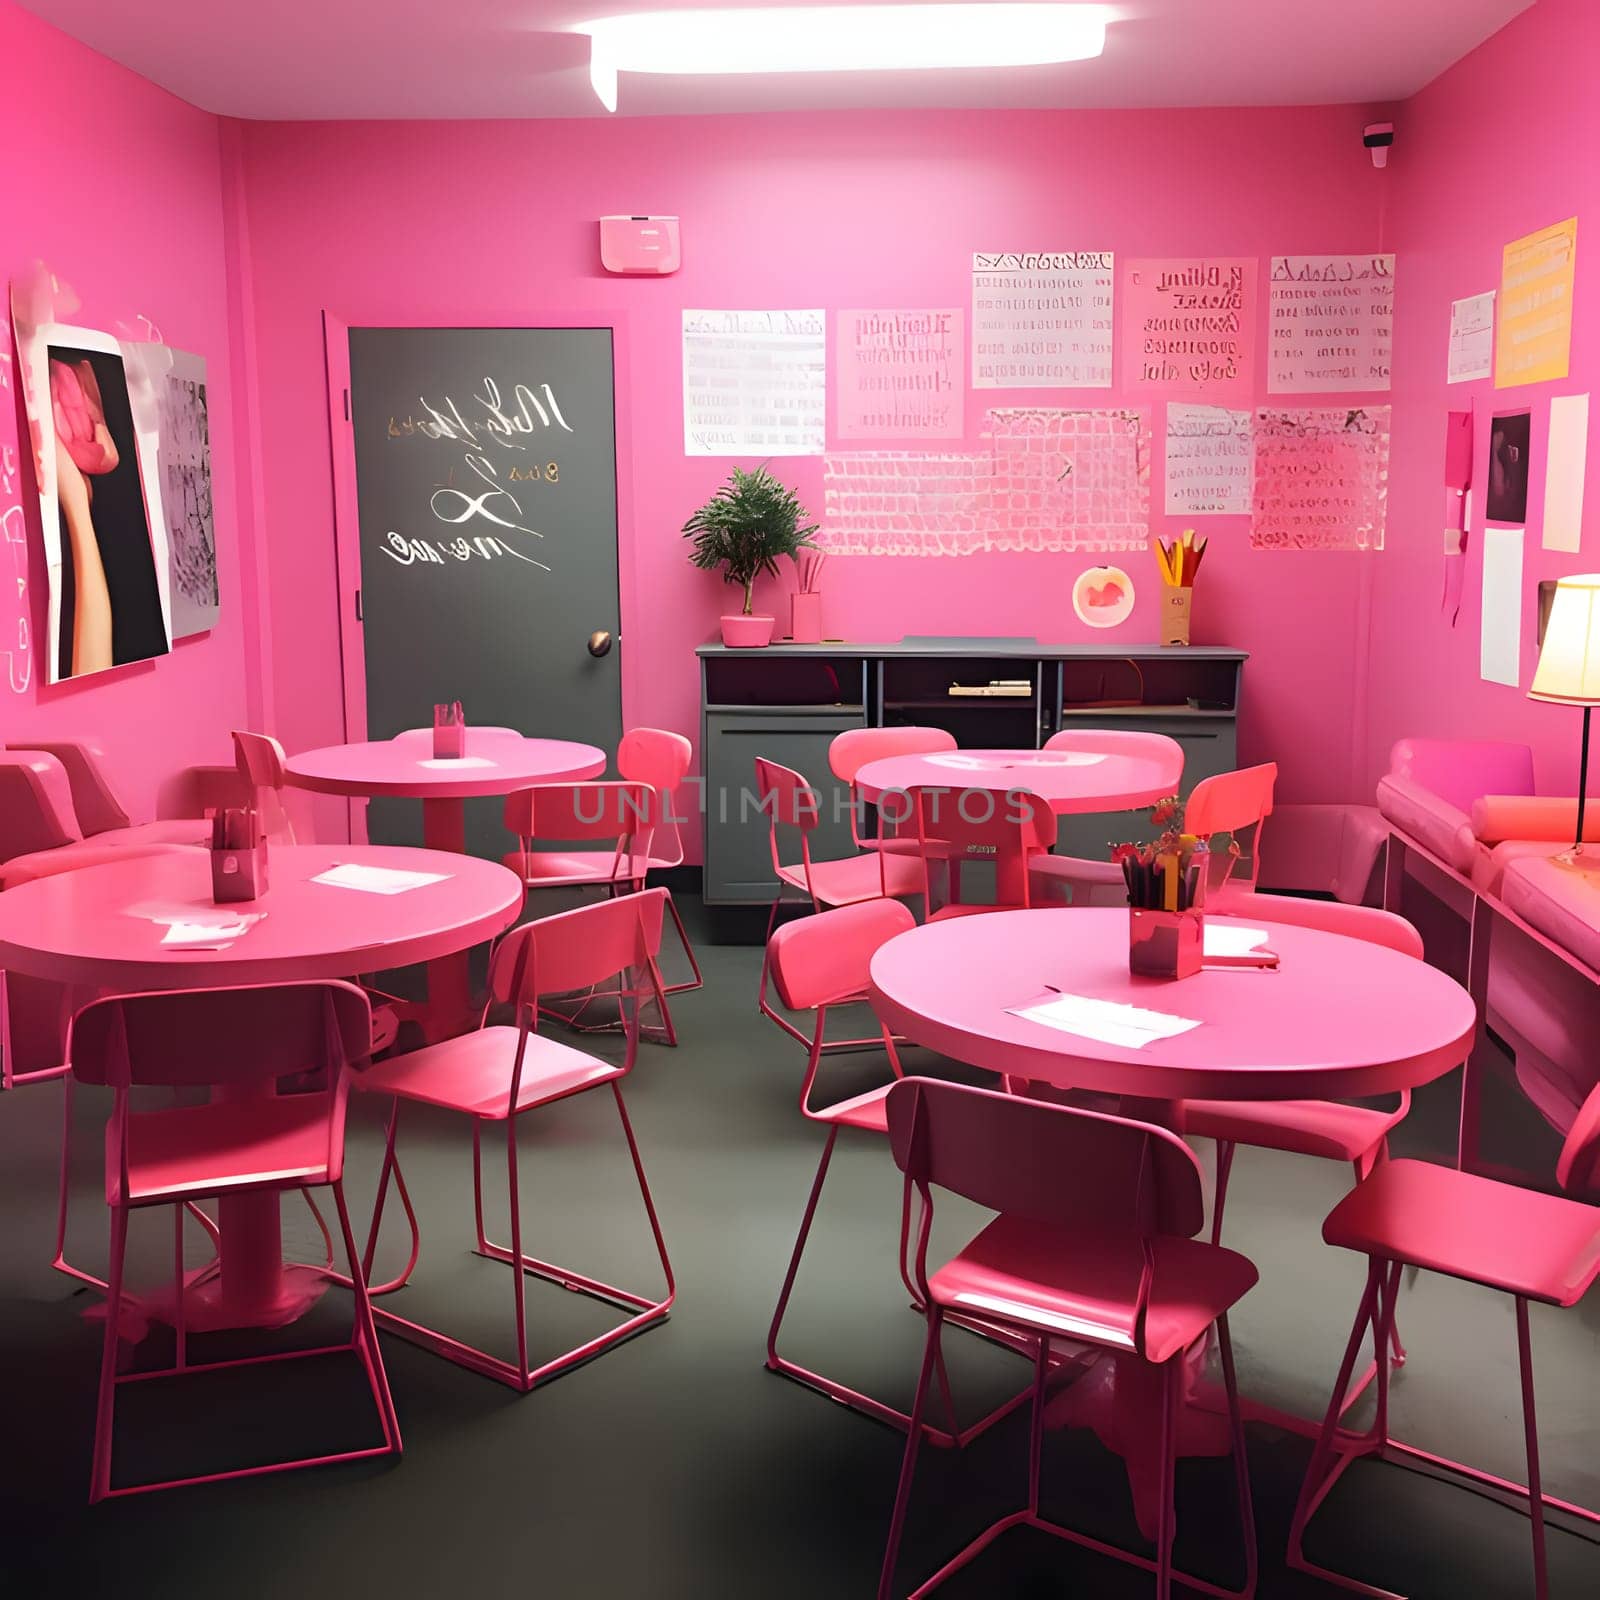 Pink barbie room, chairs, windows, tables, cabinets. by ThemesS